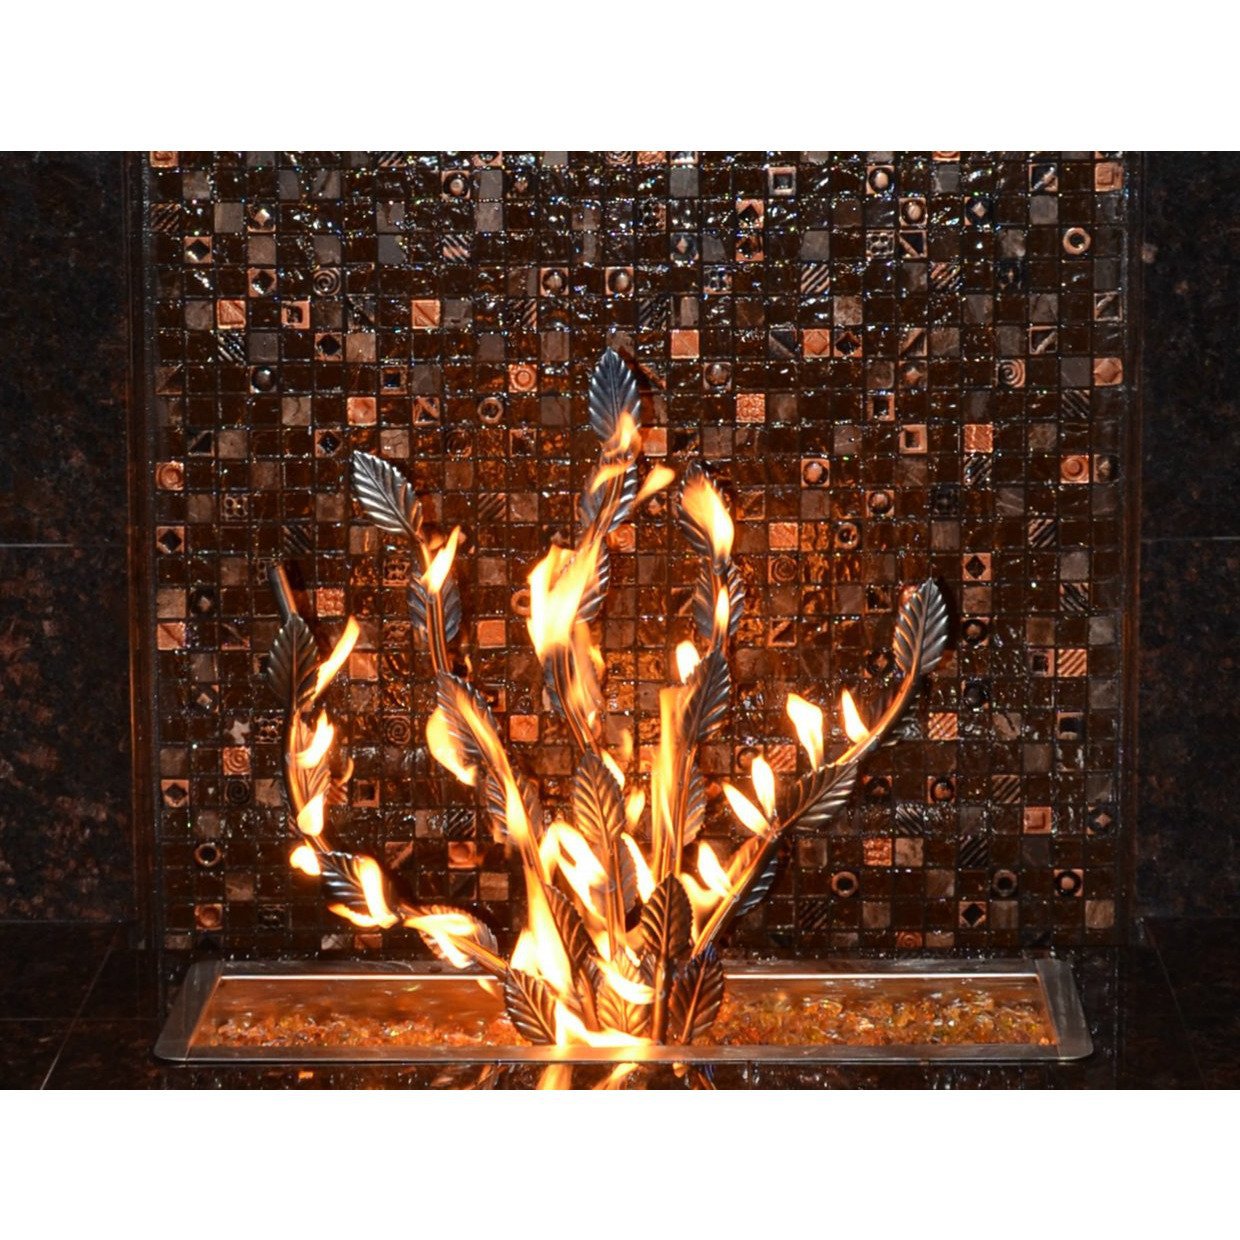 The Outdoor Plus 24"H Stainless Steel Fire Tree Burner Ornament